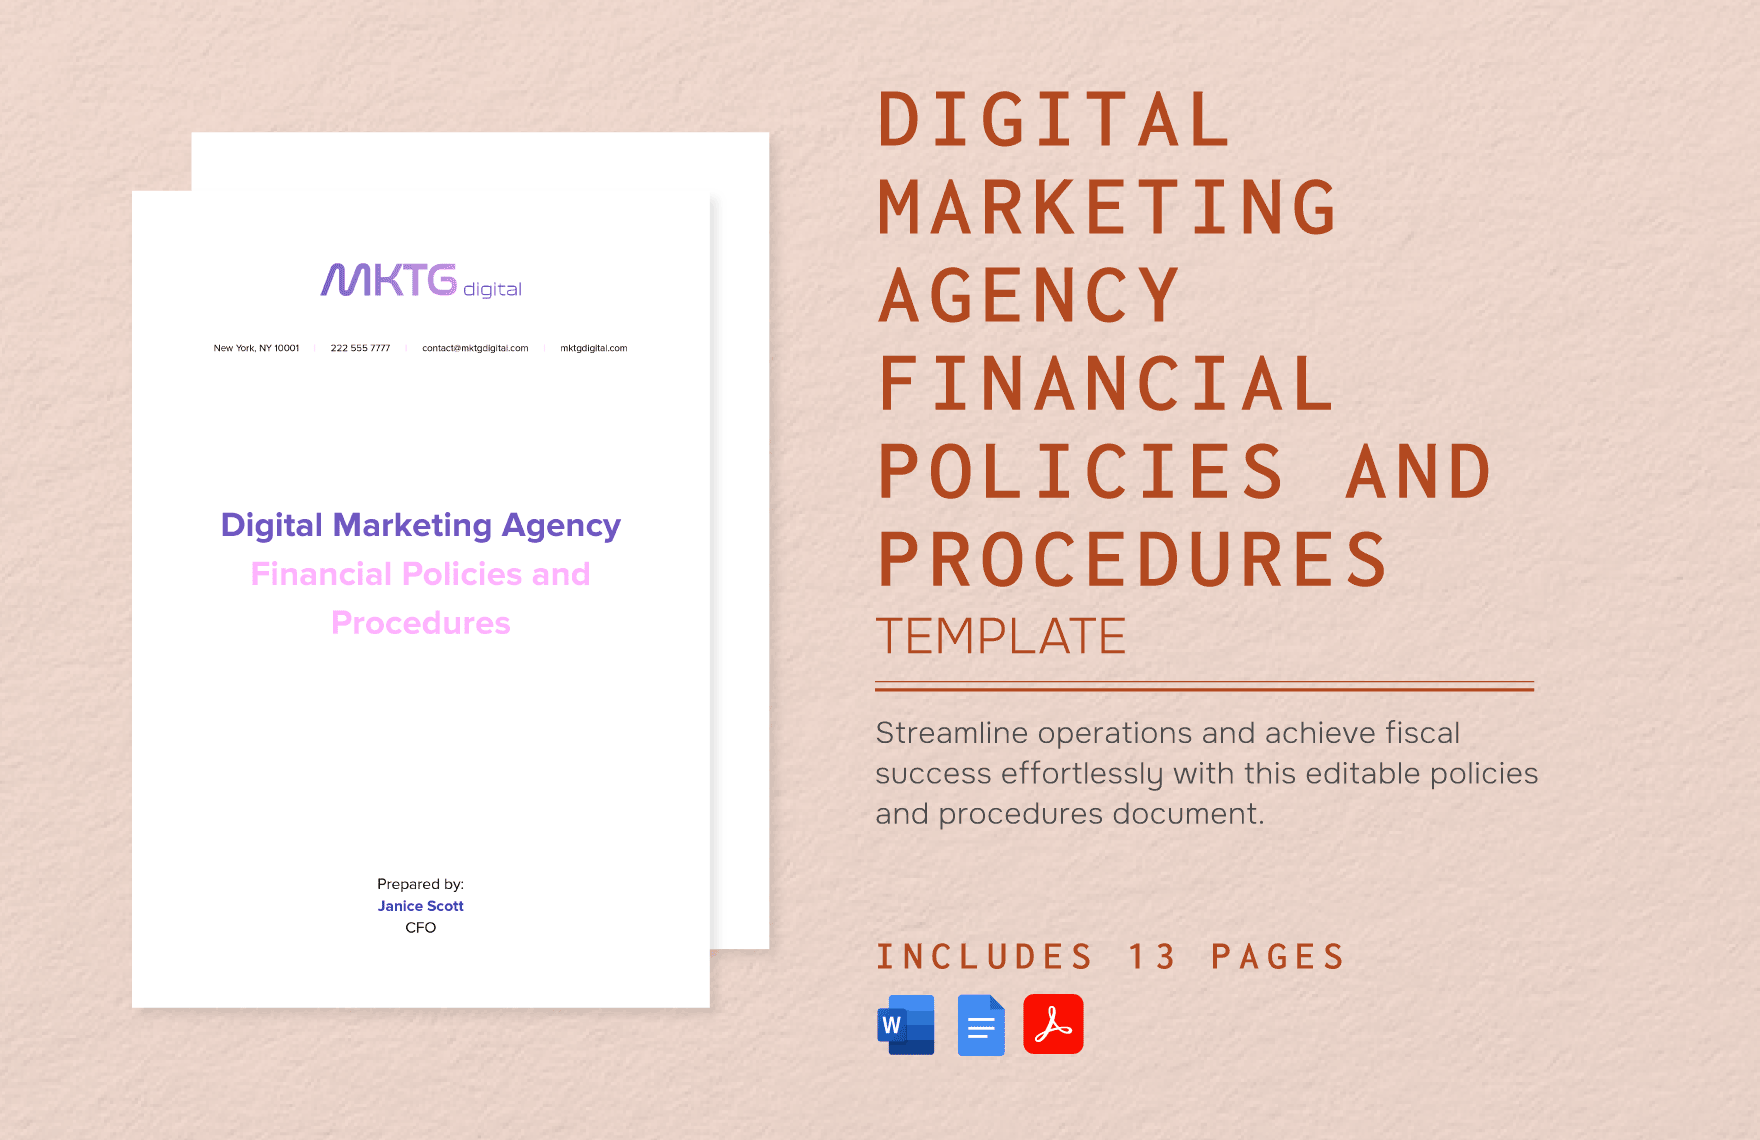 Digital Marketing Agency Financial Policies and Procedures Template in Word, Google Docs, PDF